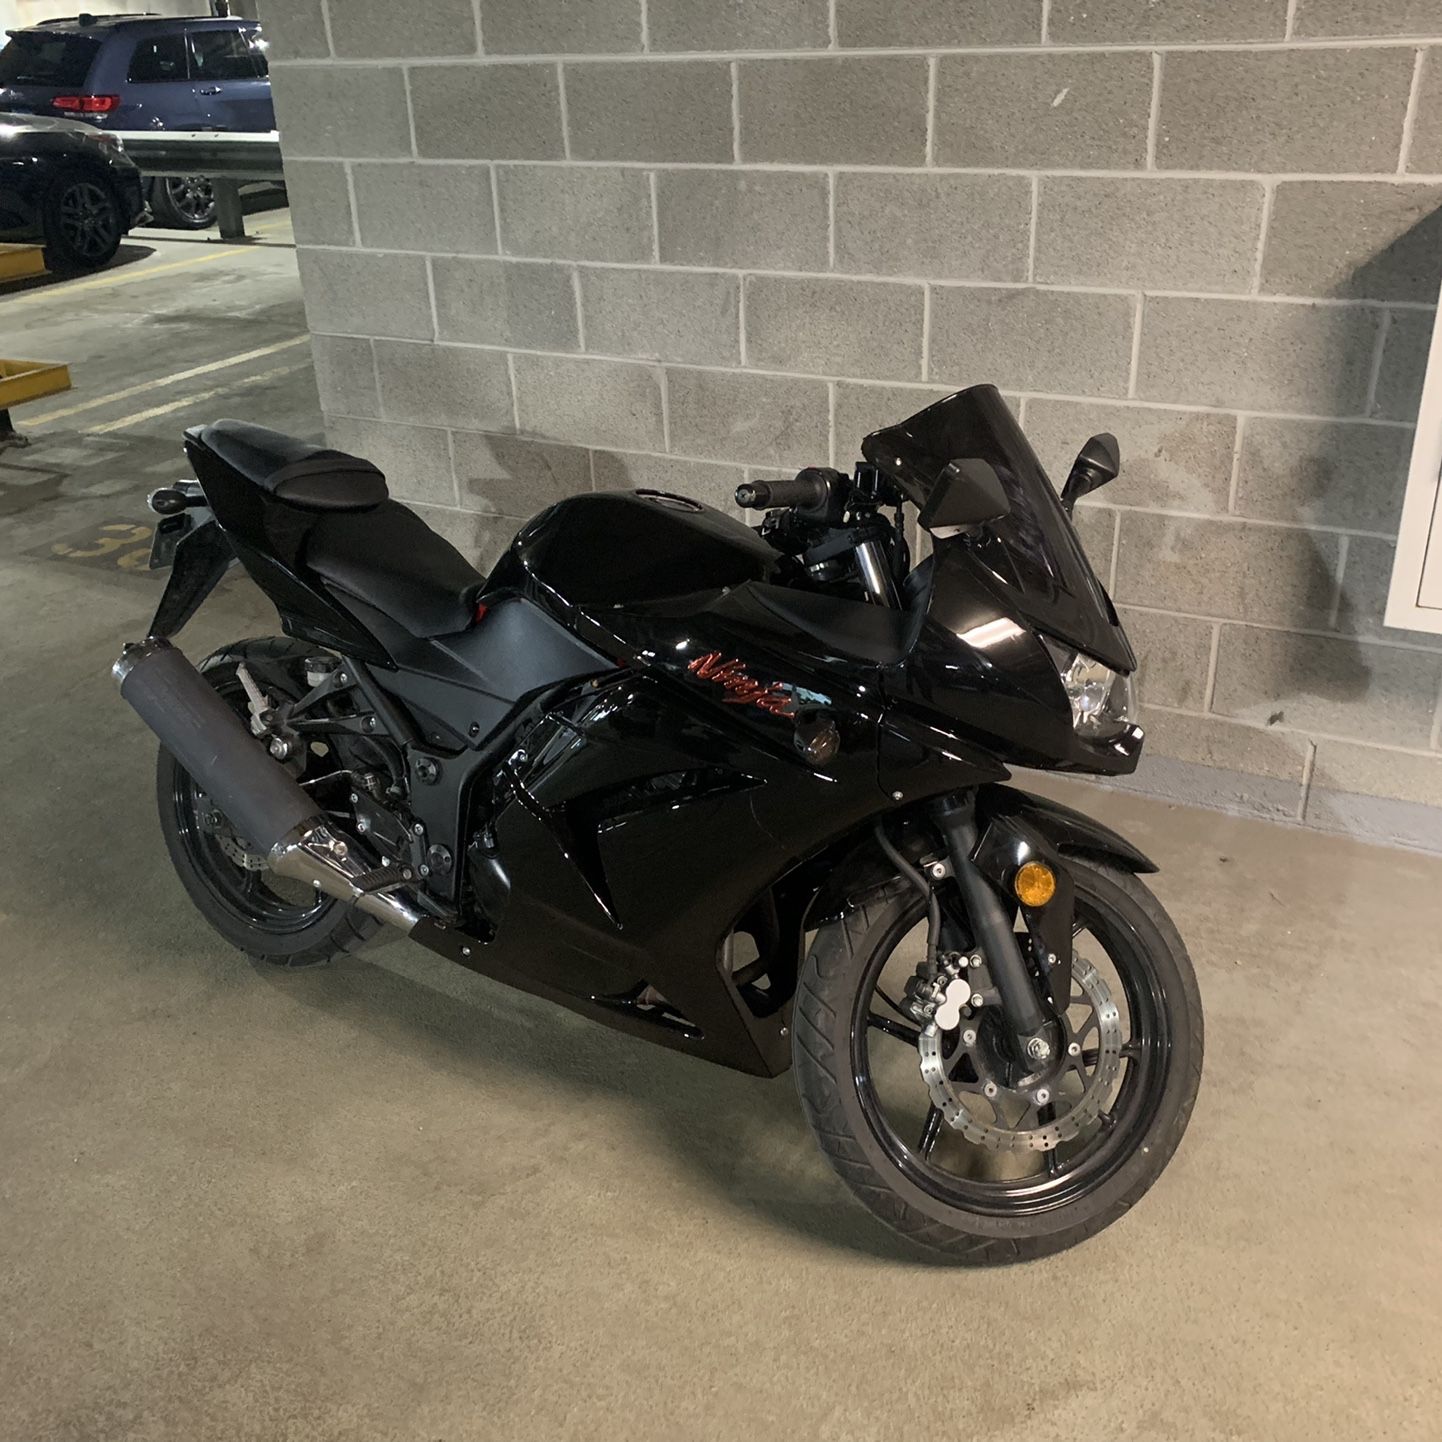 Pligt Tomat Skuffelse 2012 Ninja 250r for Sale in Chicago, IL - OfferUp